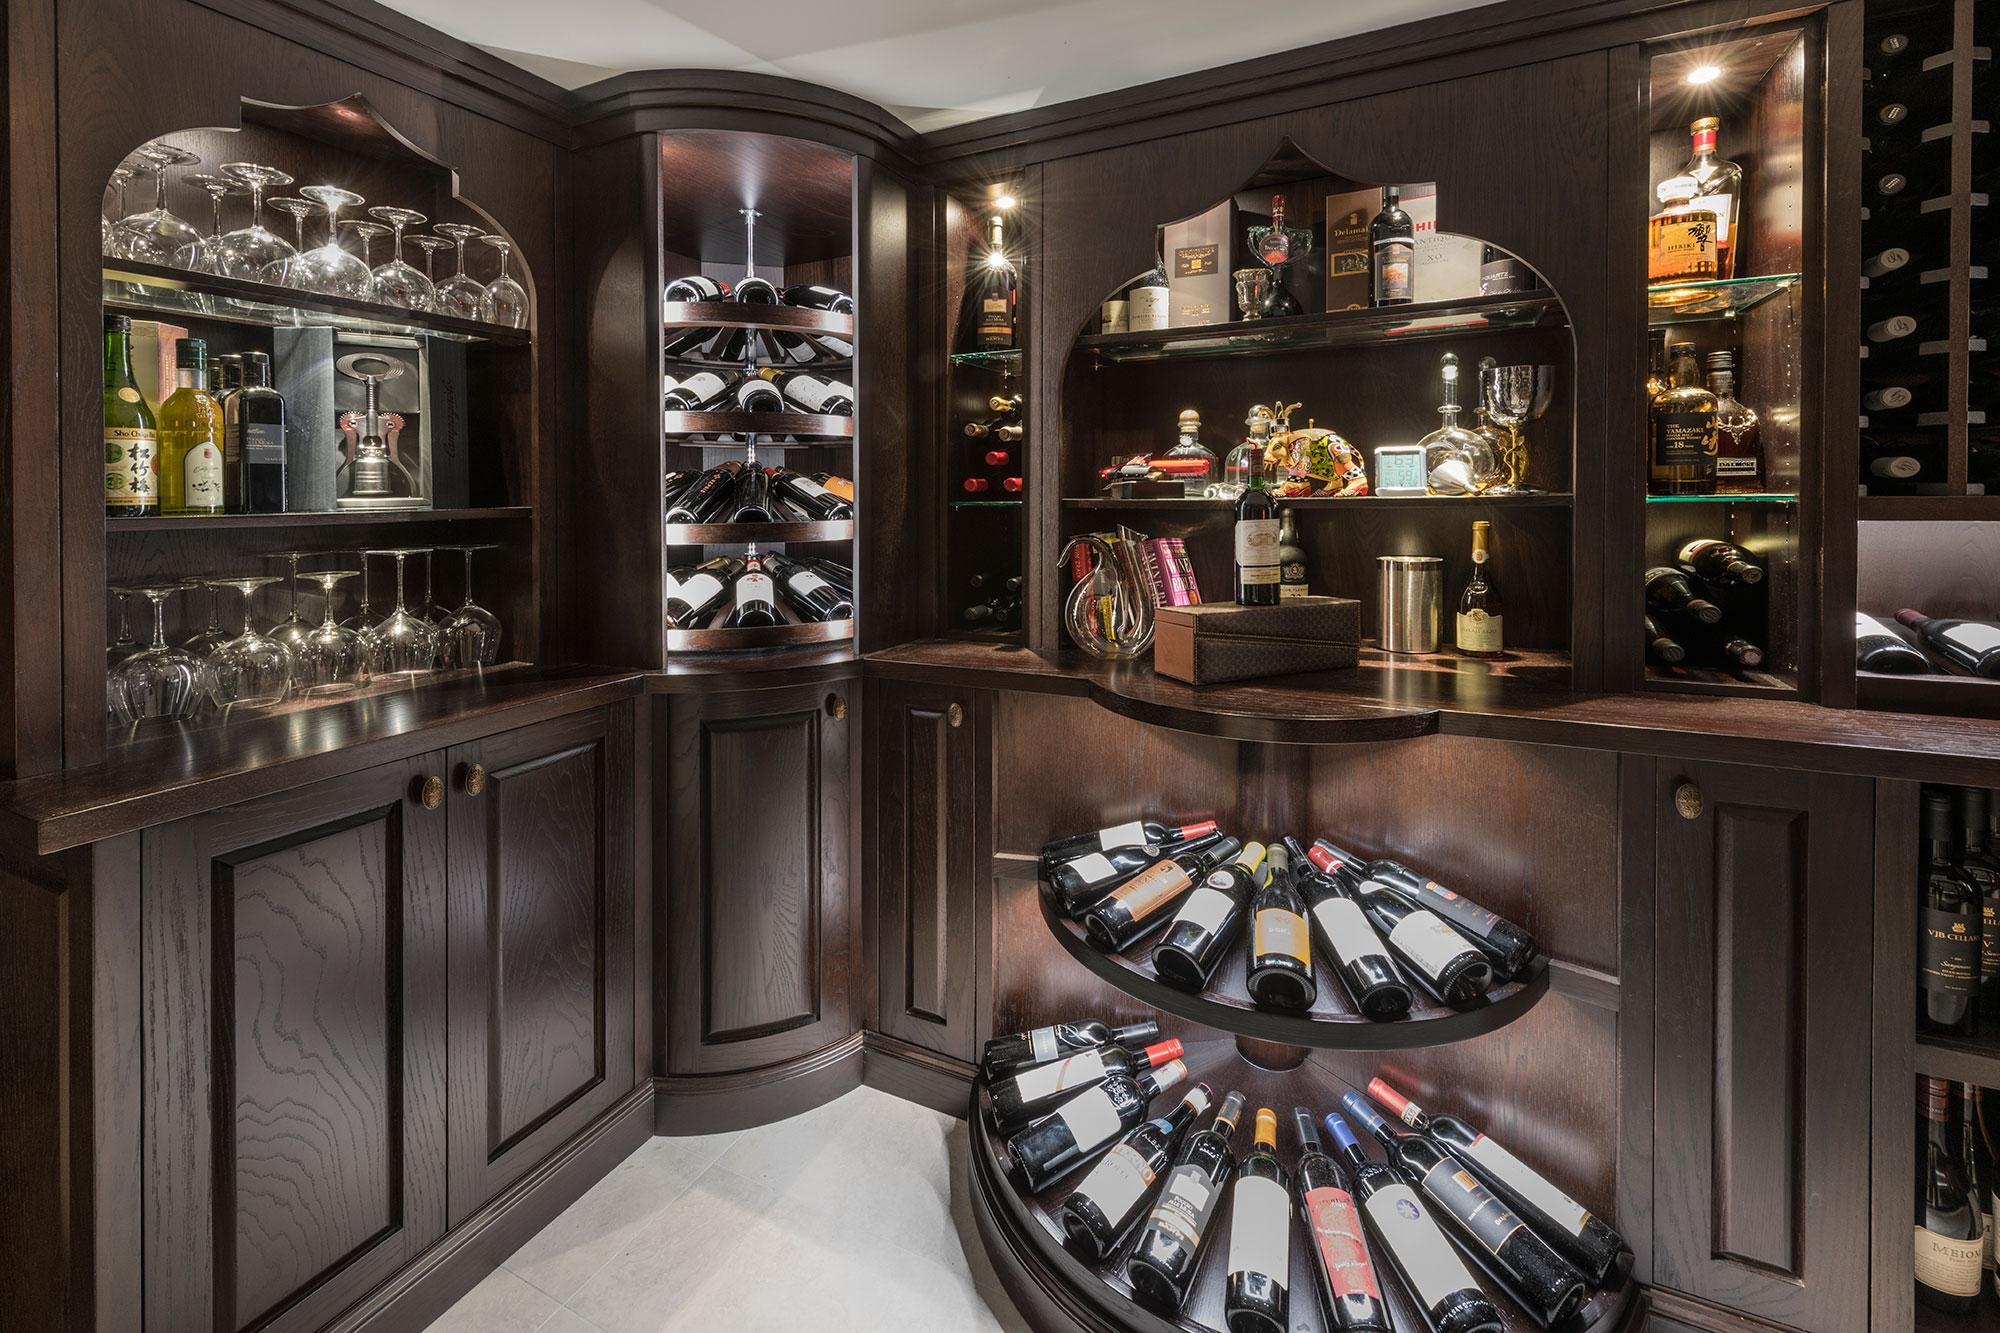 Tiered solid wood apron displays below solid wood shelving unit.  - Glenview Haus - Custom Doors, Wine Cellars and Cabinets in Chicago